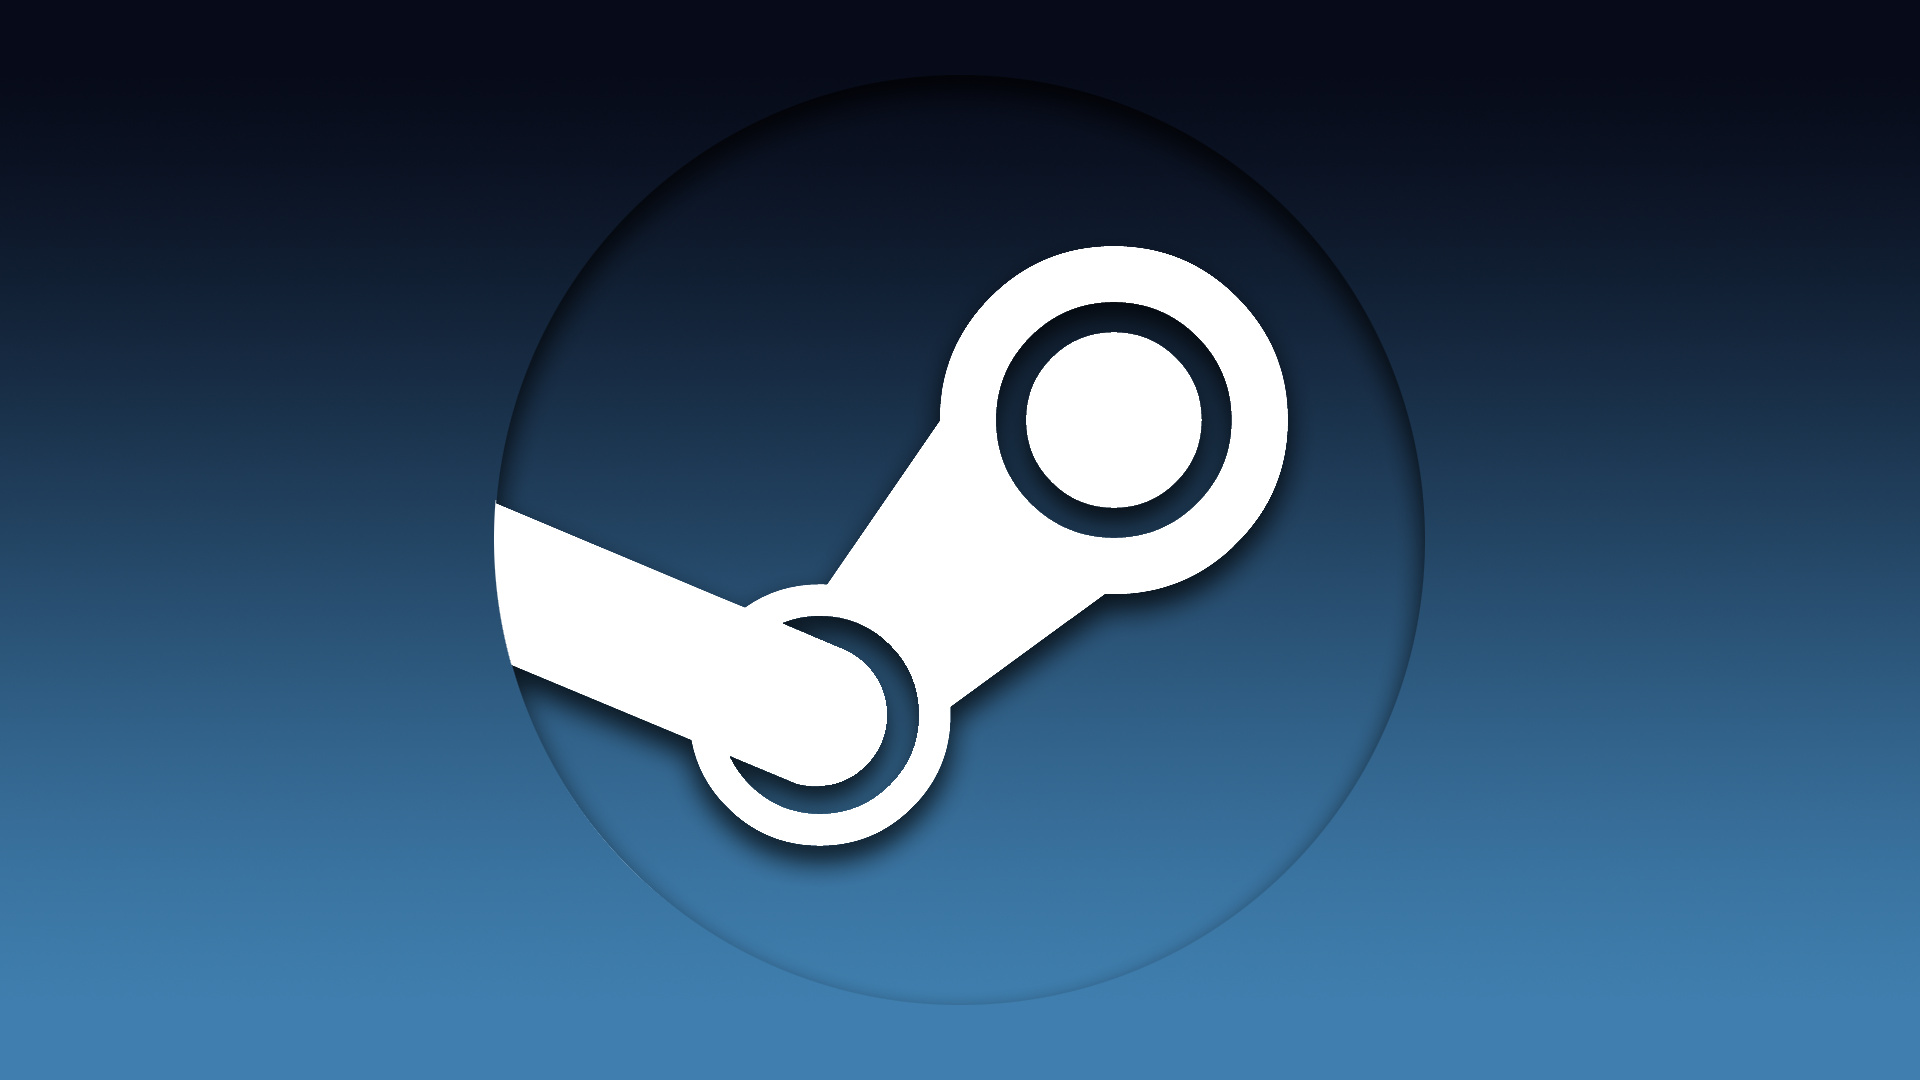 Steam: The client allows users to install PC games online directly to their cloud drives after purchase. 1920x1080 Full HD Background.